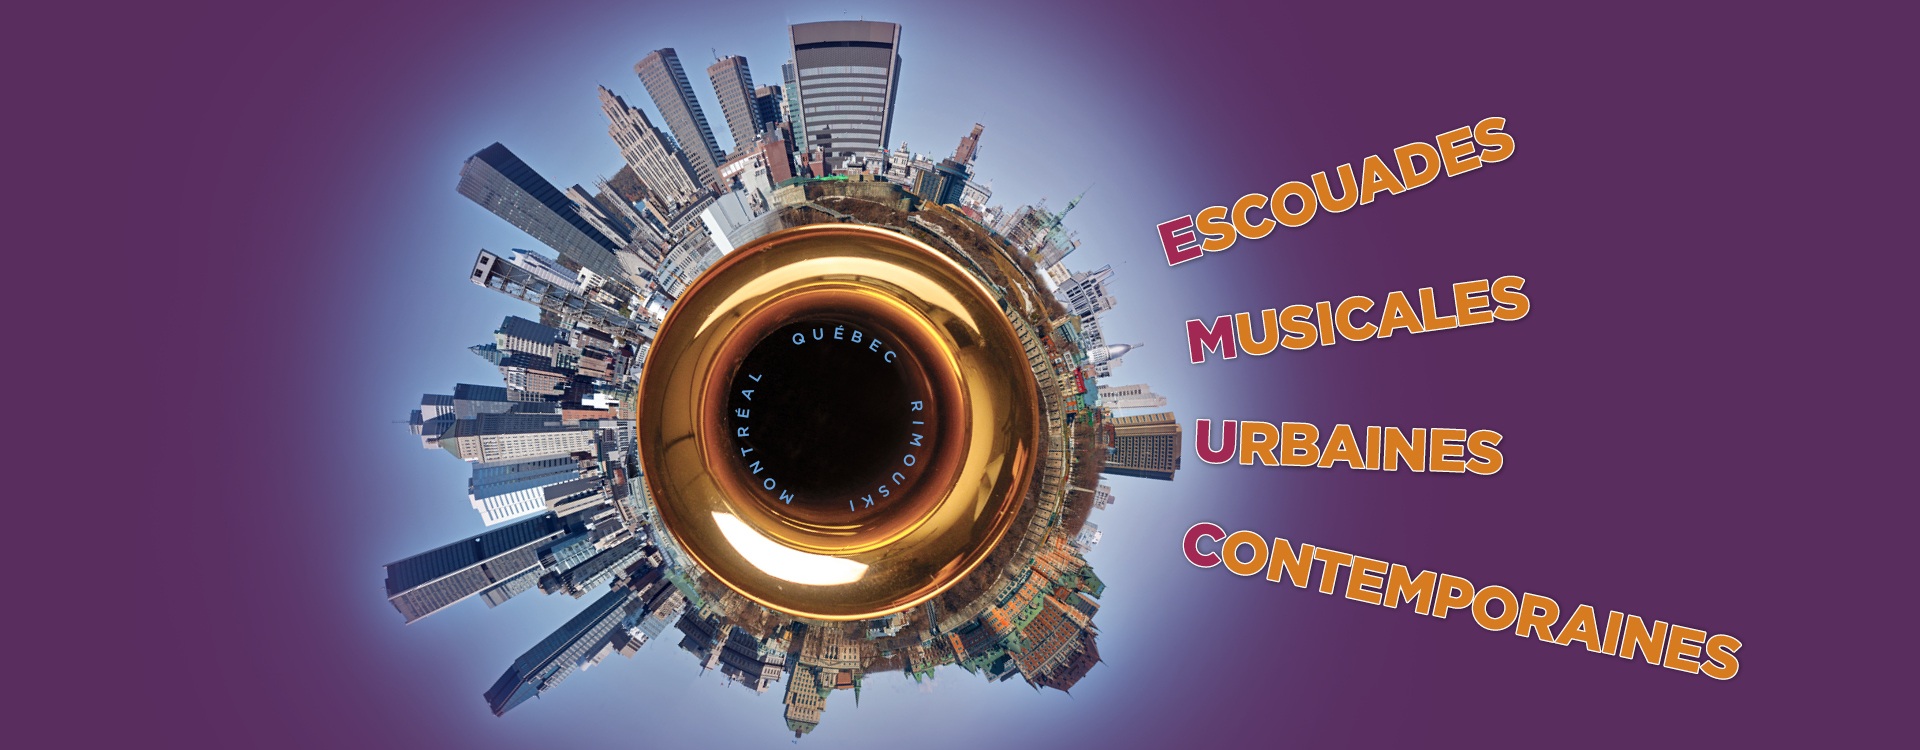 Banner for the project Escouades Musicales Urbaines Contemporaines